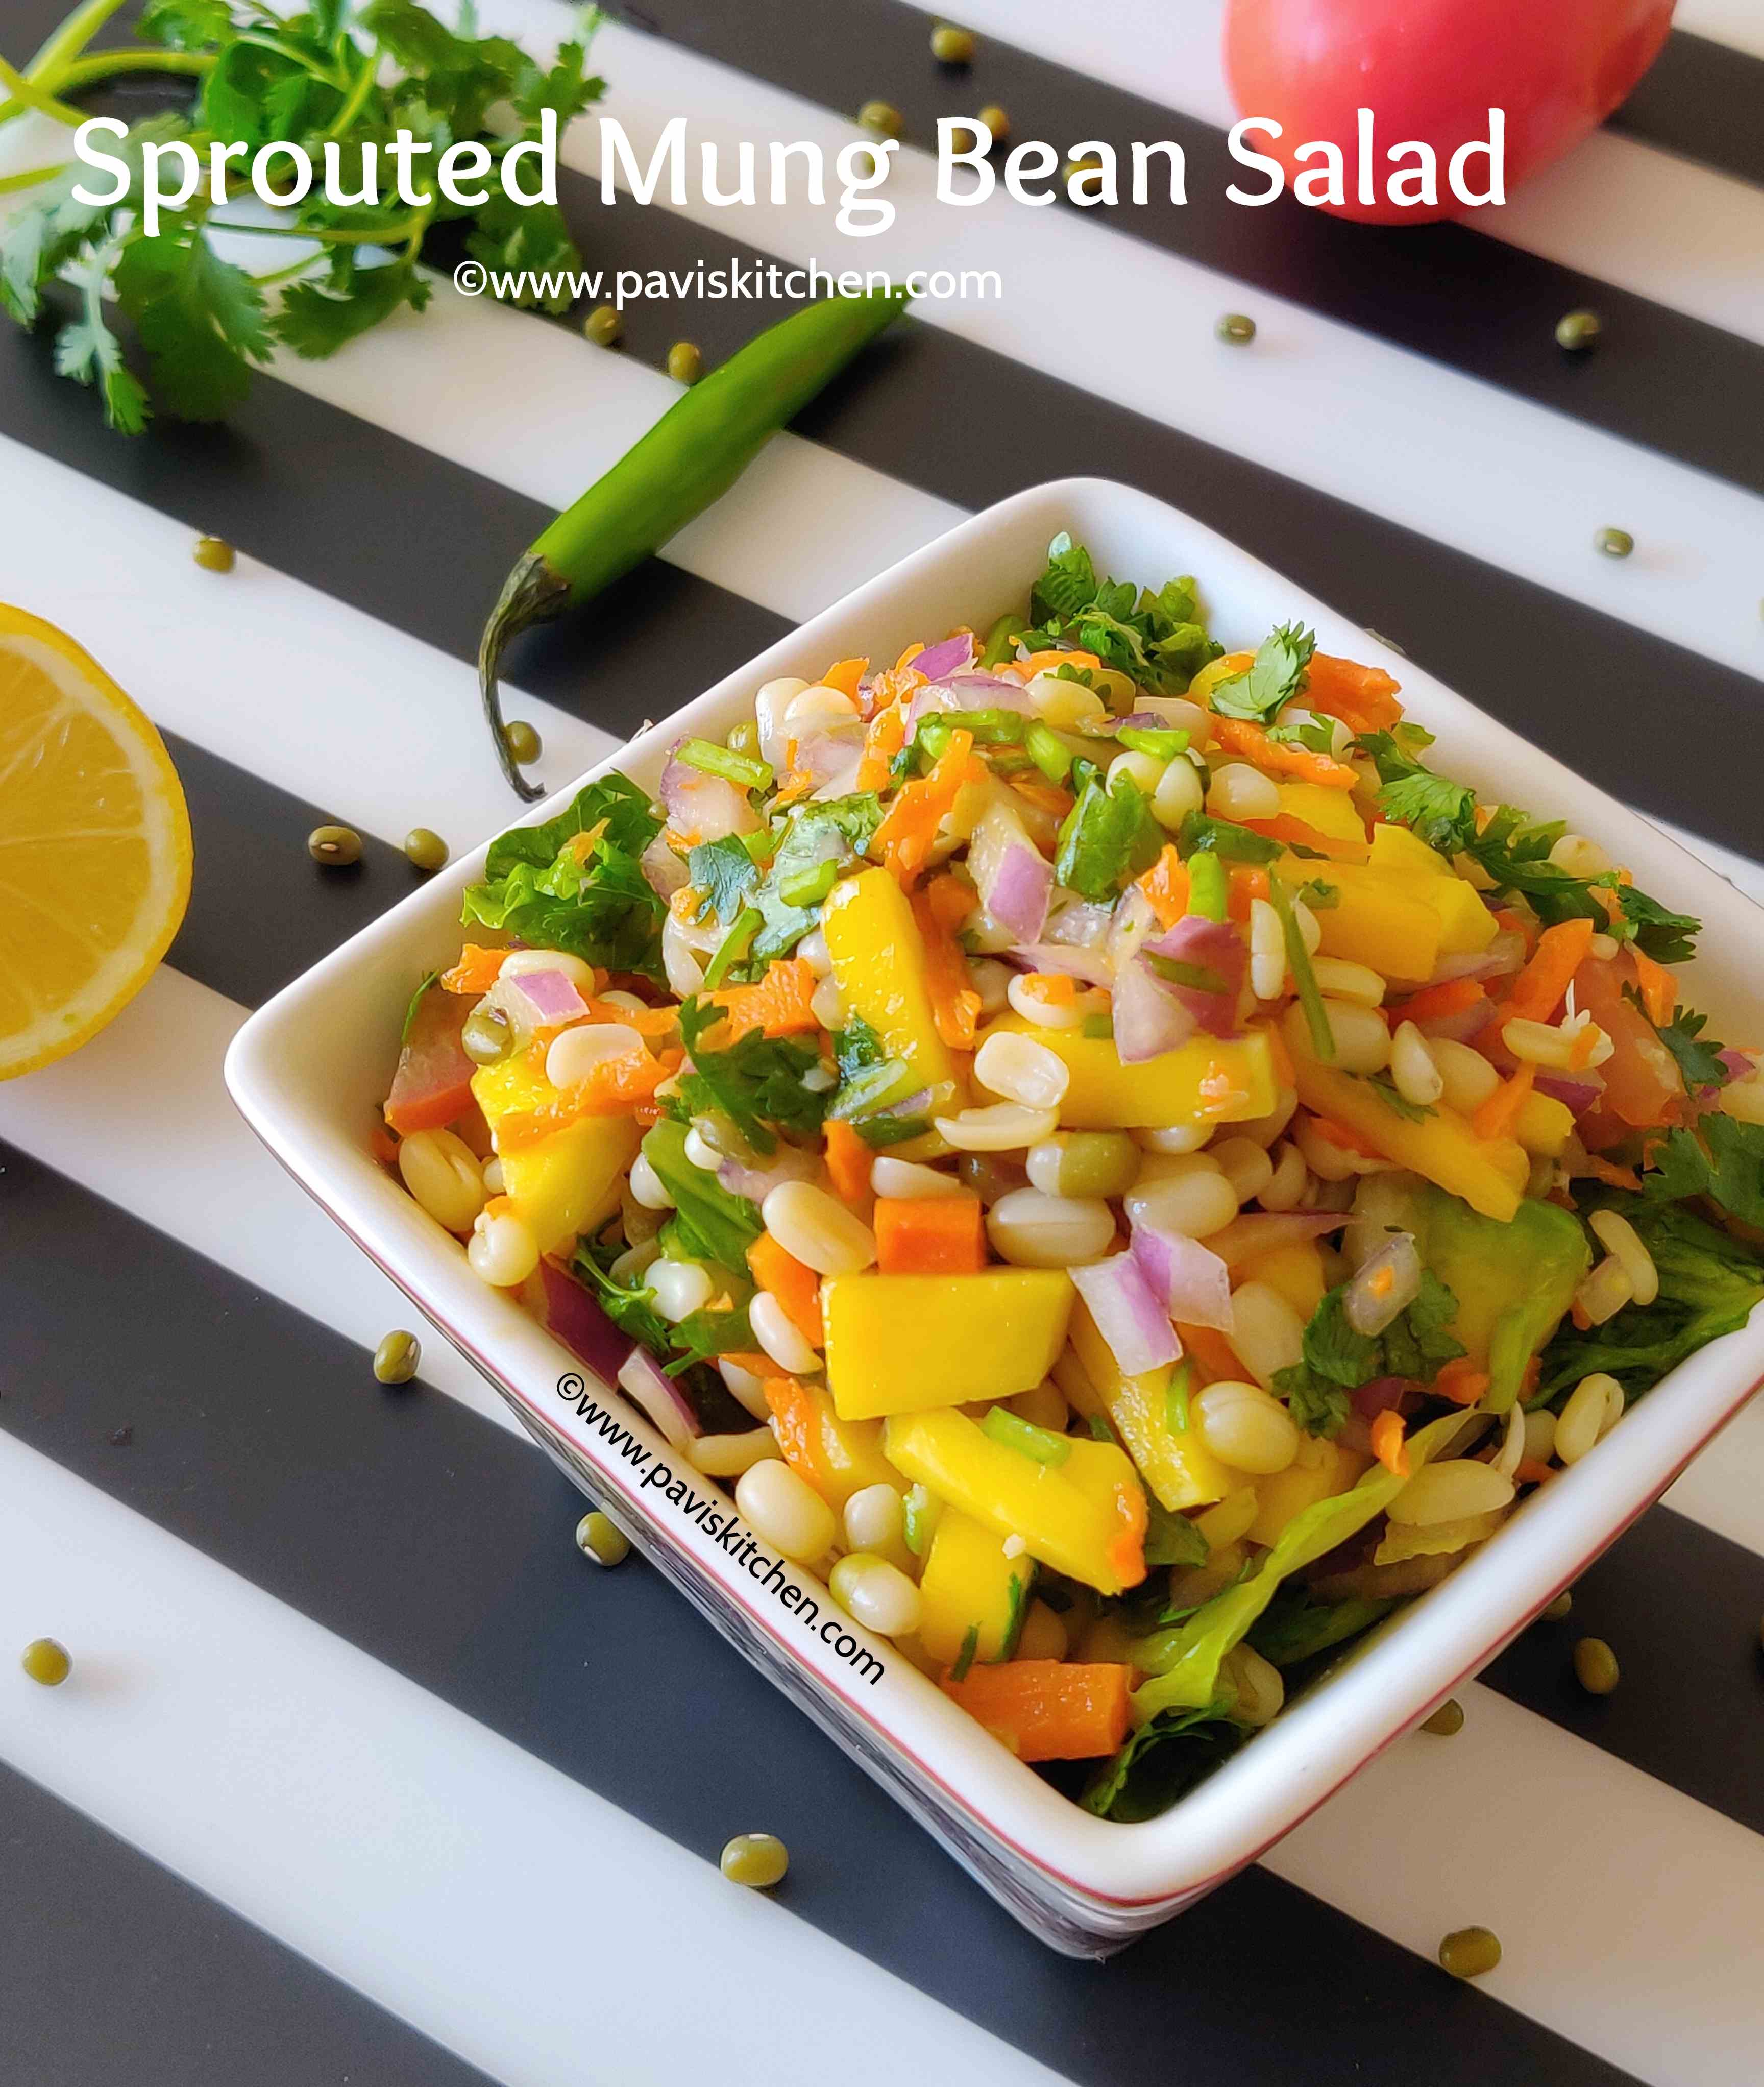 Sprouted mung bean salad with rainbow veggies - Indian recipe